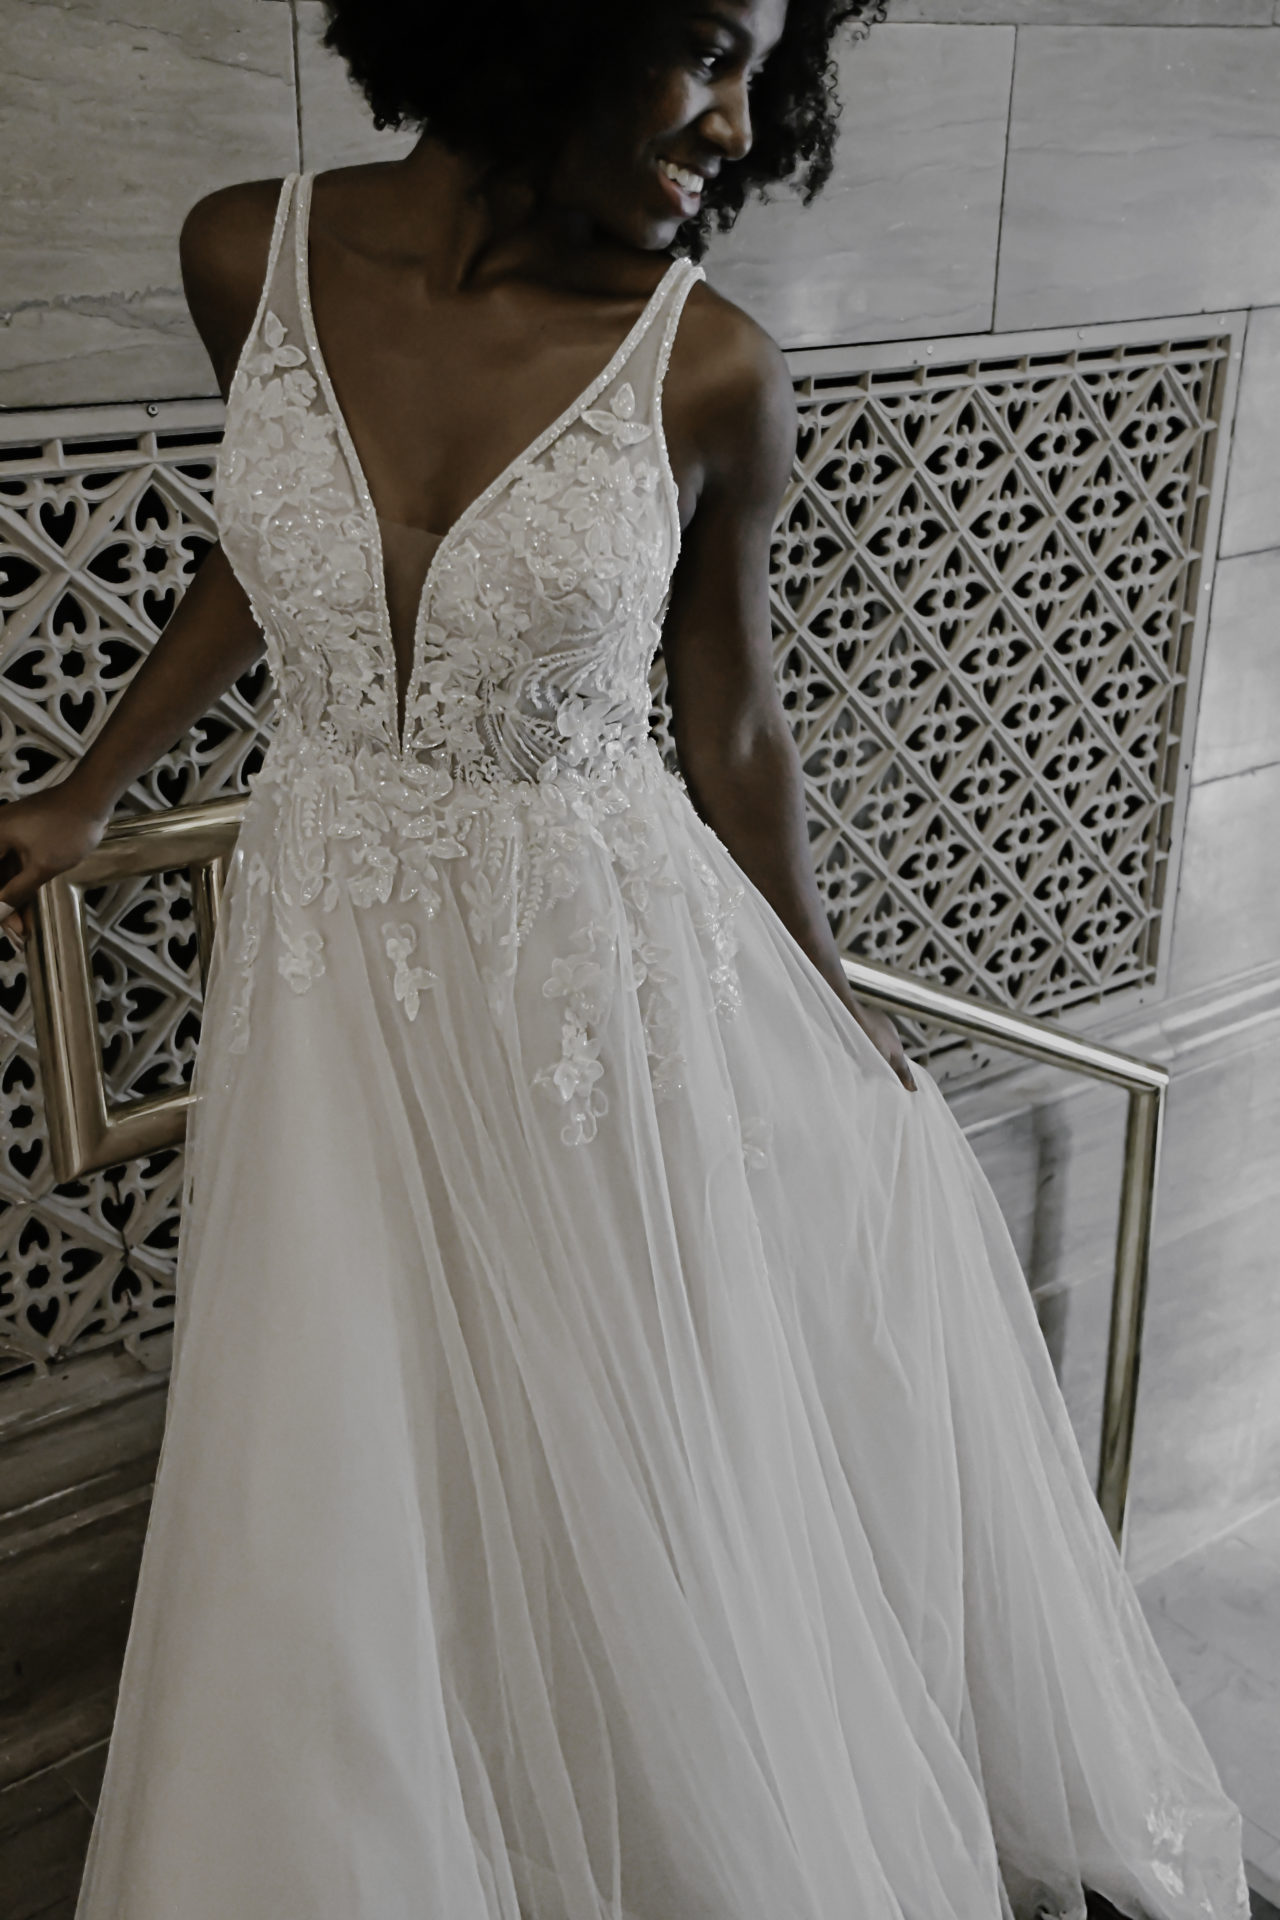 Lace Halter Stylish Two Piece Wedding Dress with Pockets | Bridal Sepatates